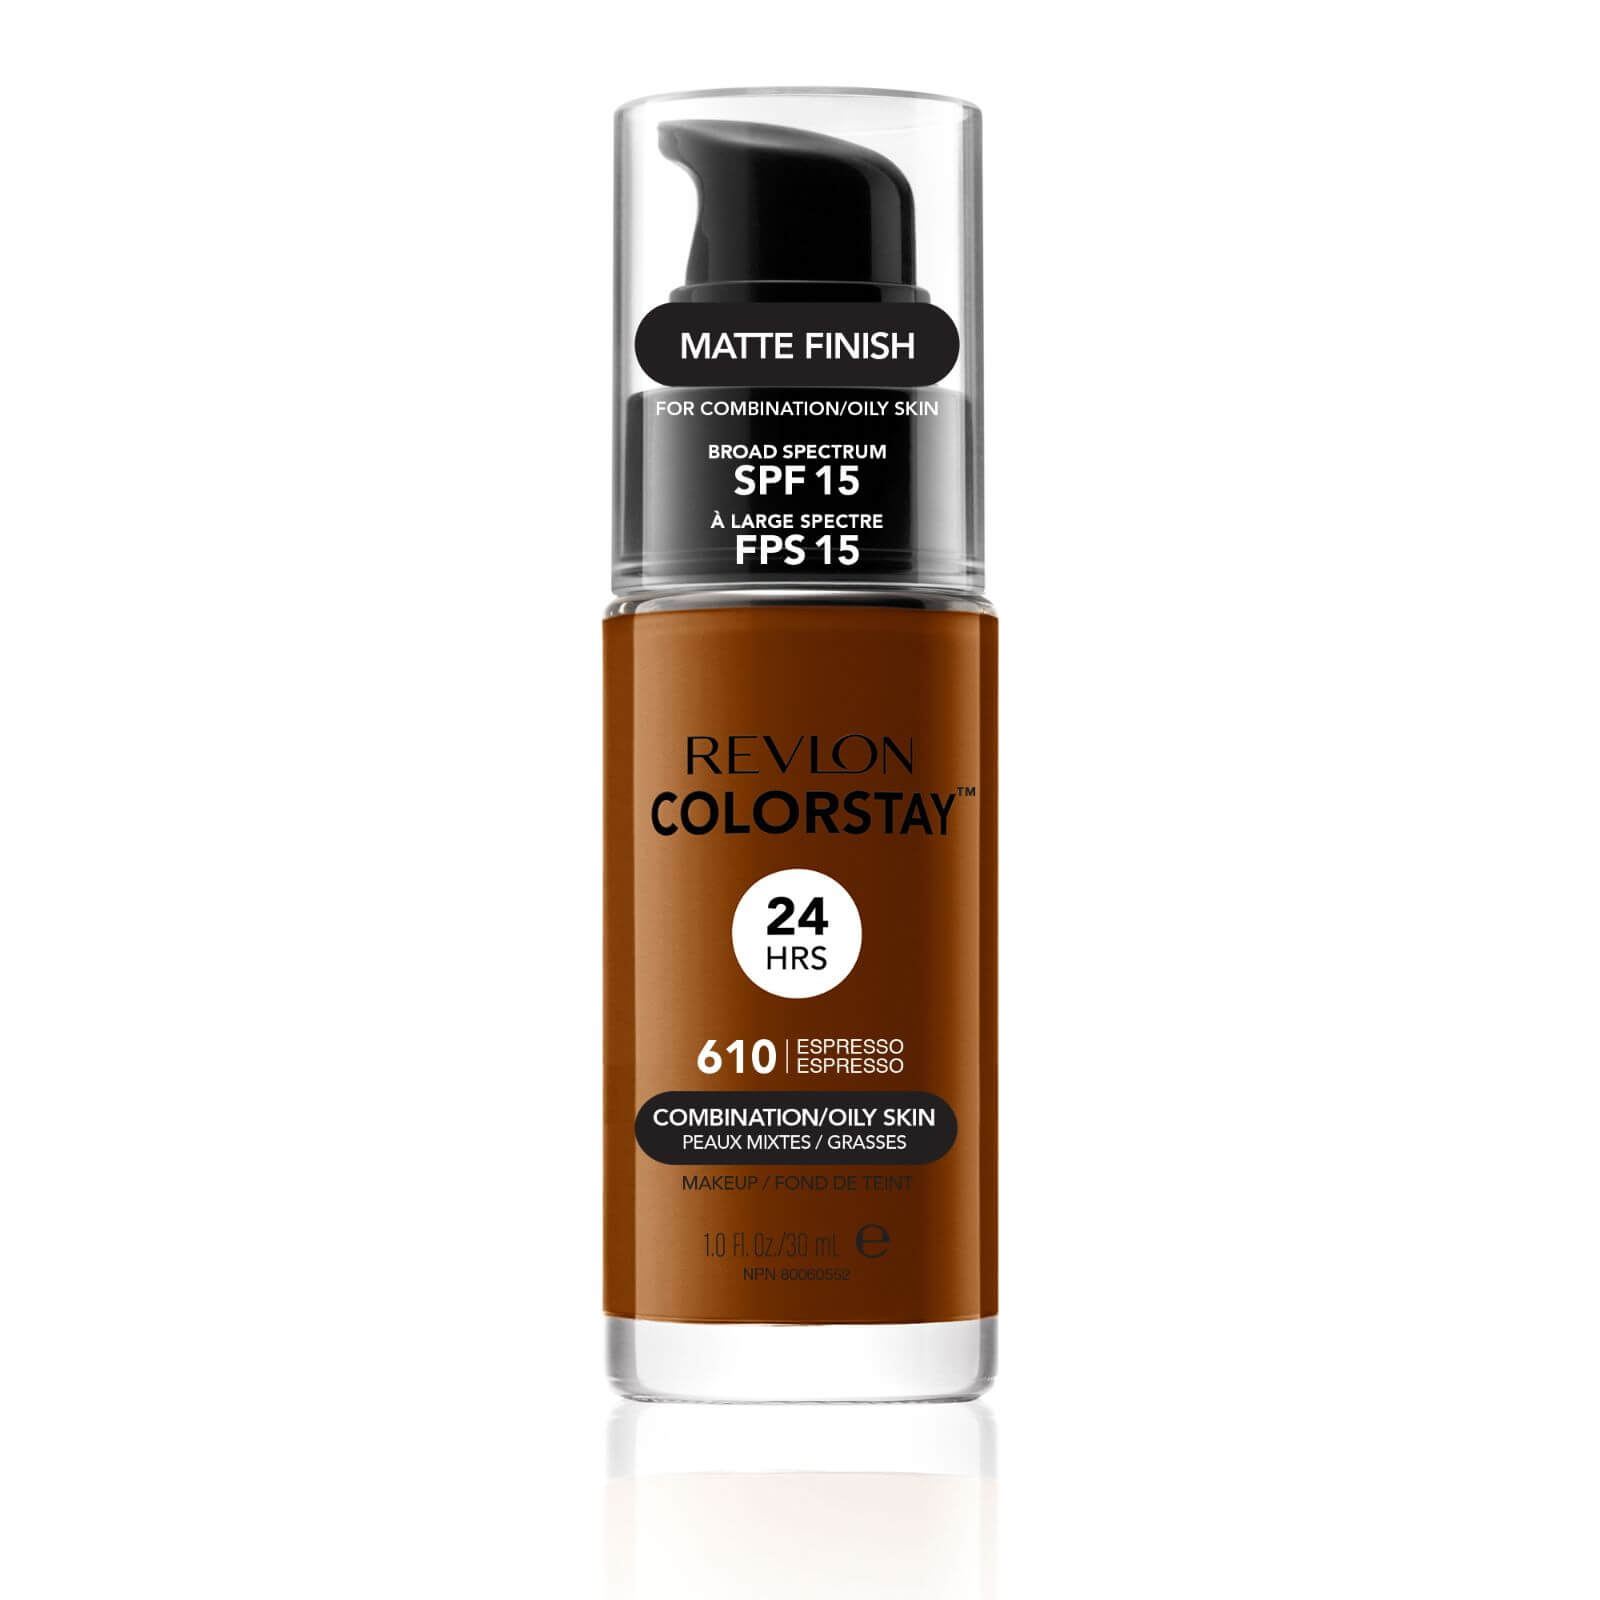 Revlon ColorStay Make-Up Foundation for Combination/Oily Skin (Various Shades) - Espresso